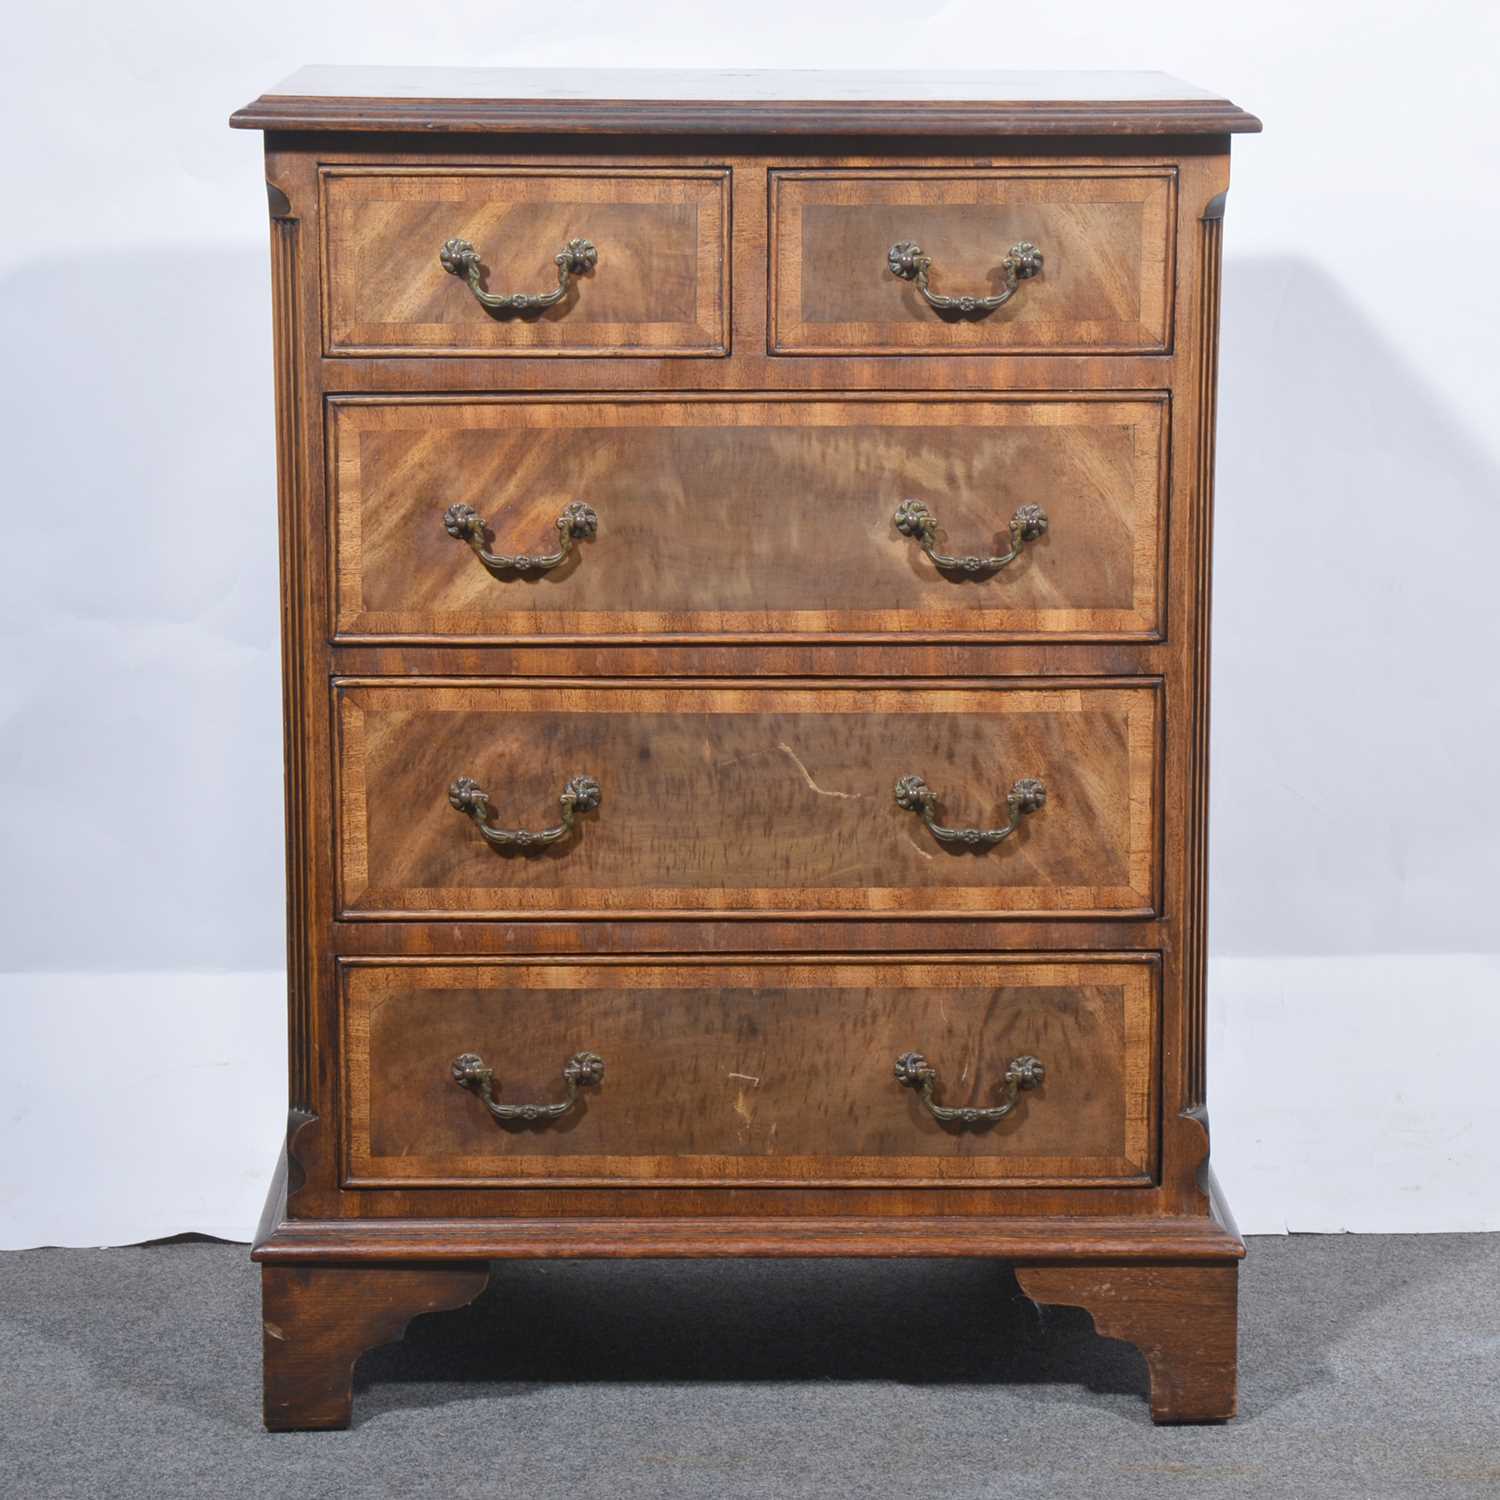 Lot 421 Reproduction Mahogany Chest Of Drawers